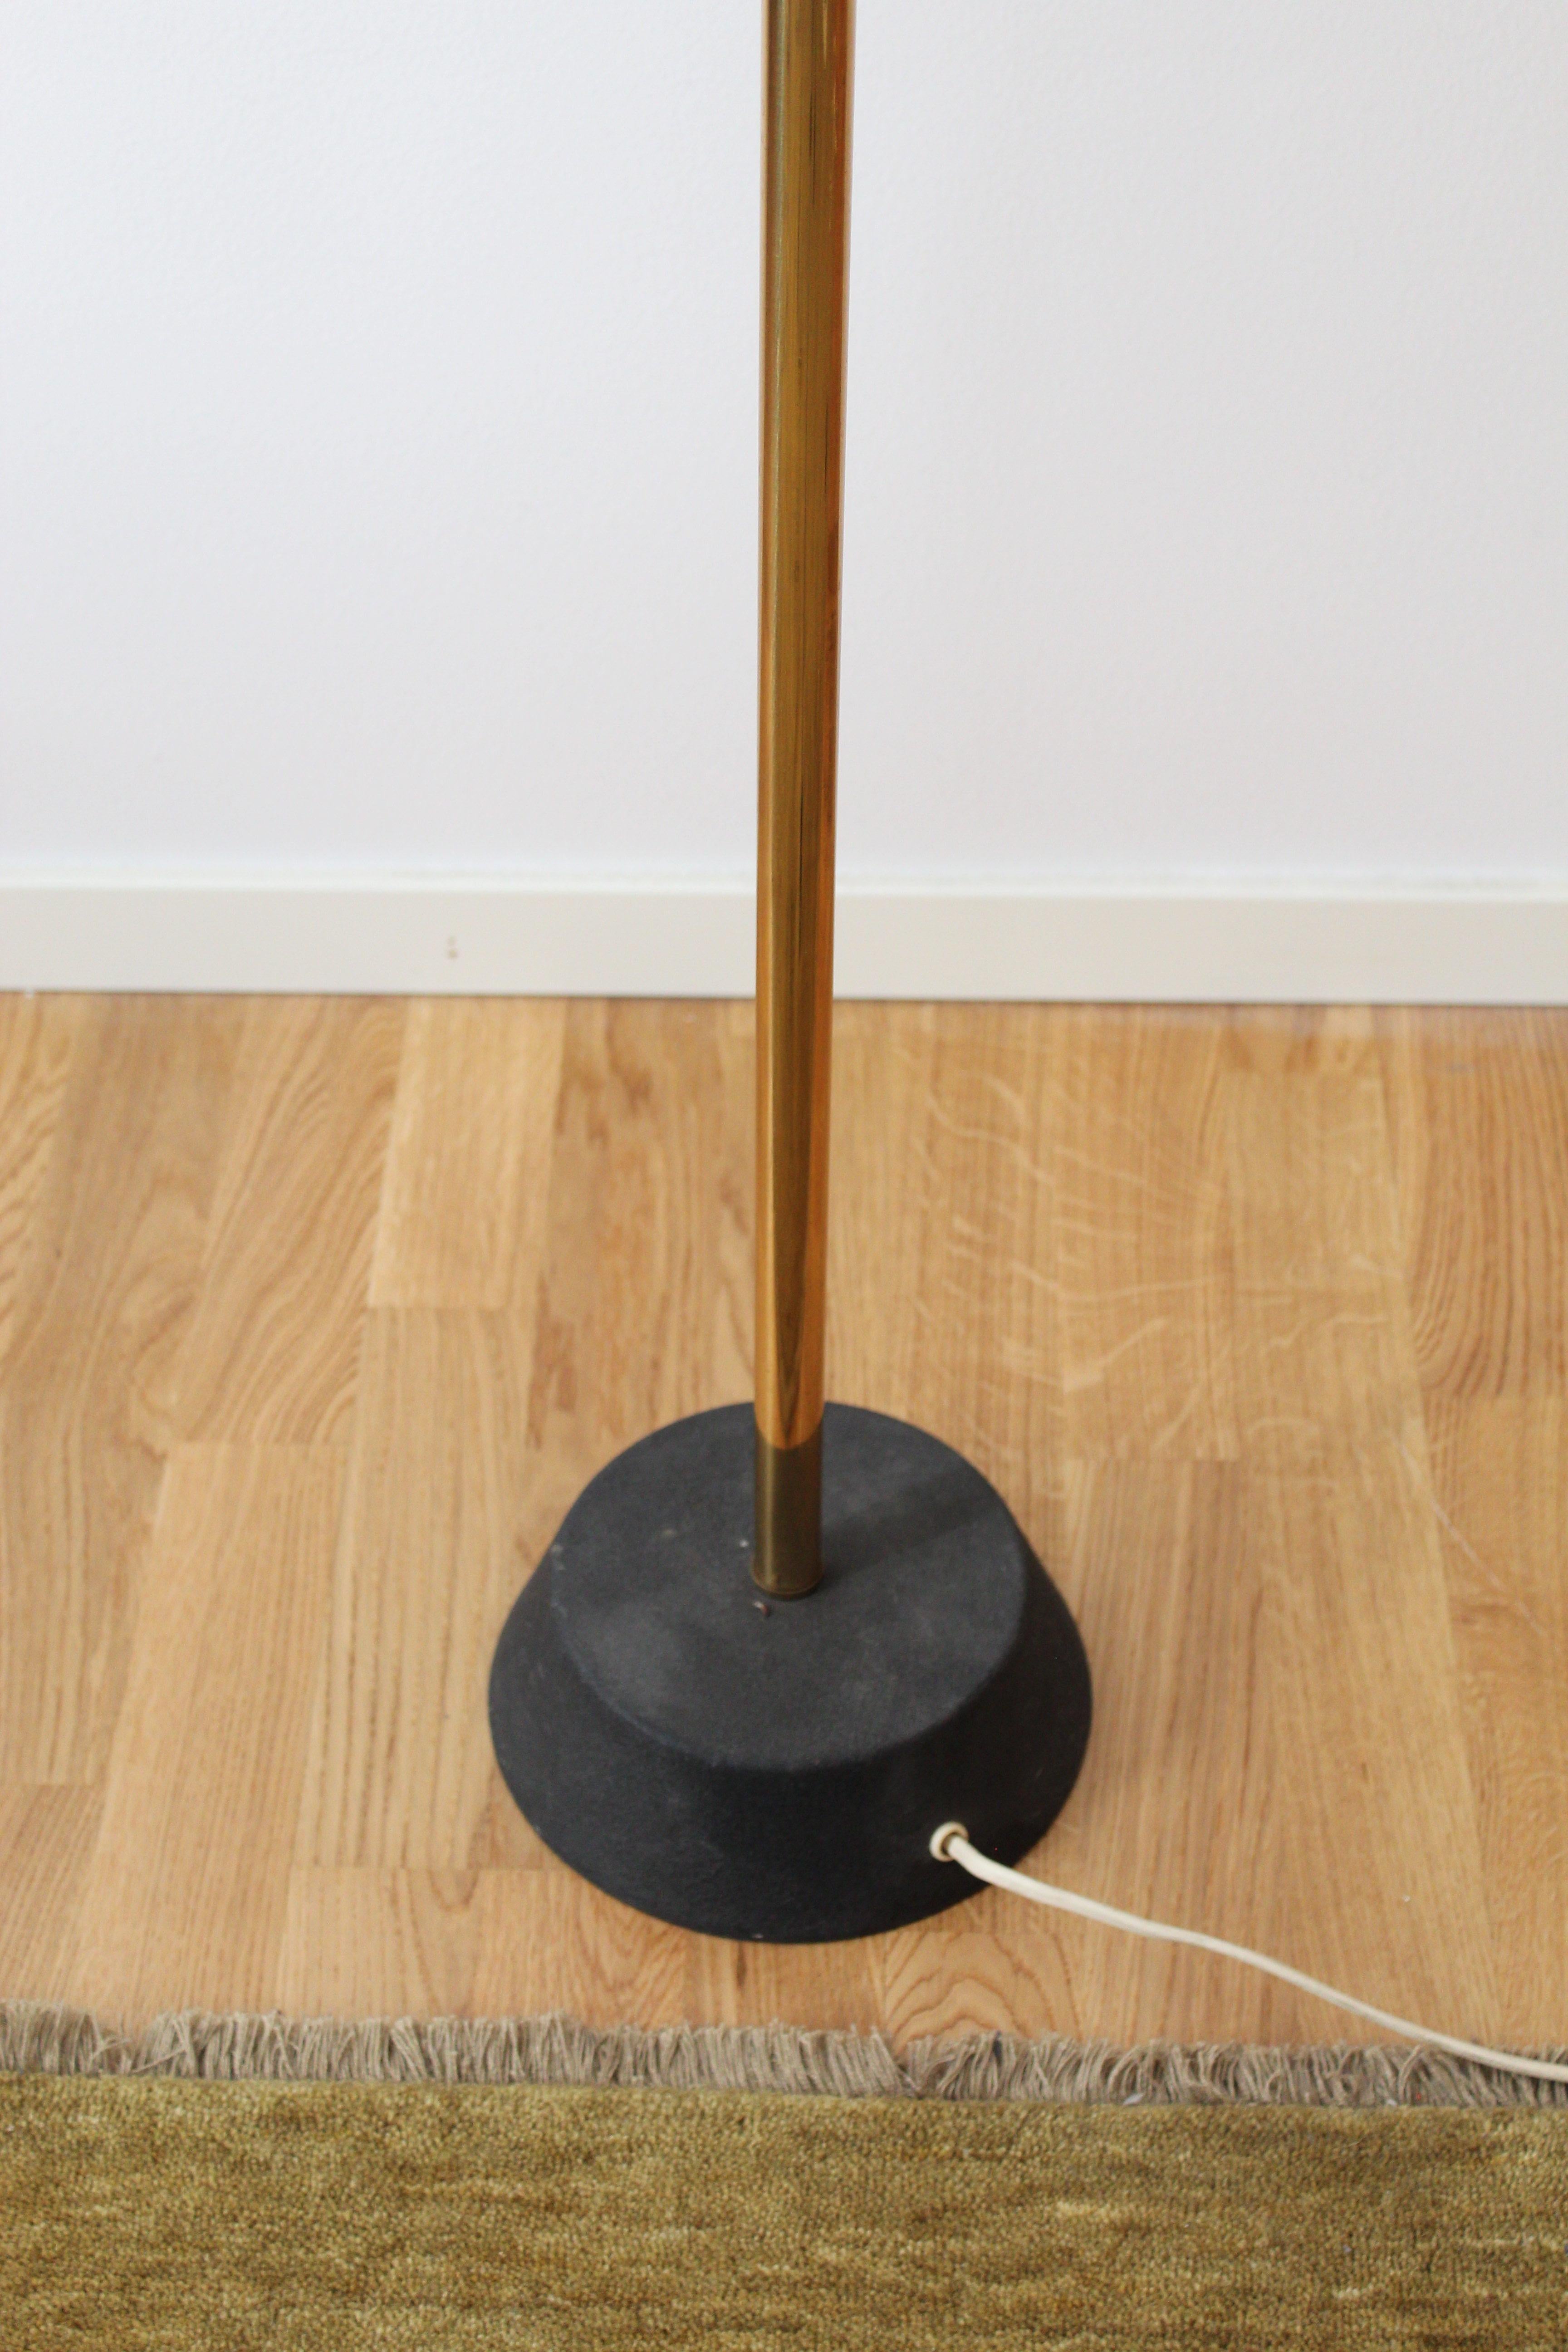 A highly modernist floor lamp. Designed and produced in Sweden, c. 1950s-1960s.

Other designers of the period include Paavo Tynell, Josef Frank, Hans Agne Jakobsson, Lisa Johansson-Pape, and Hans Bergström.